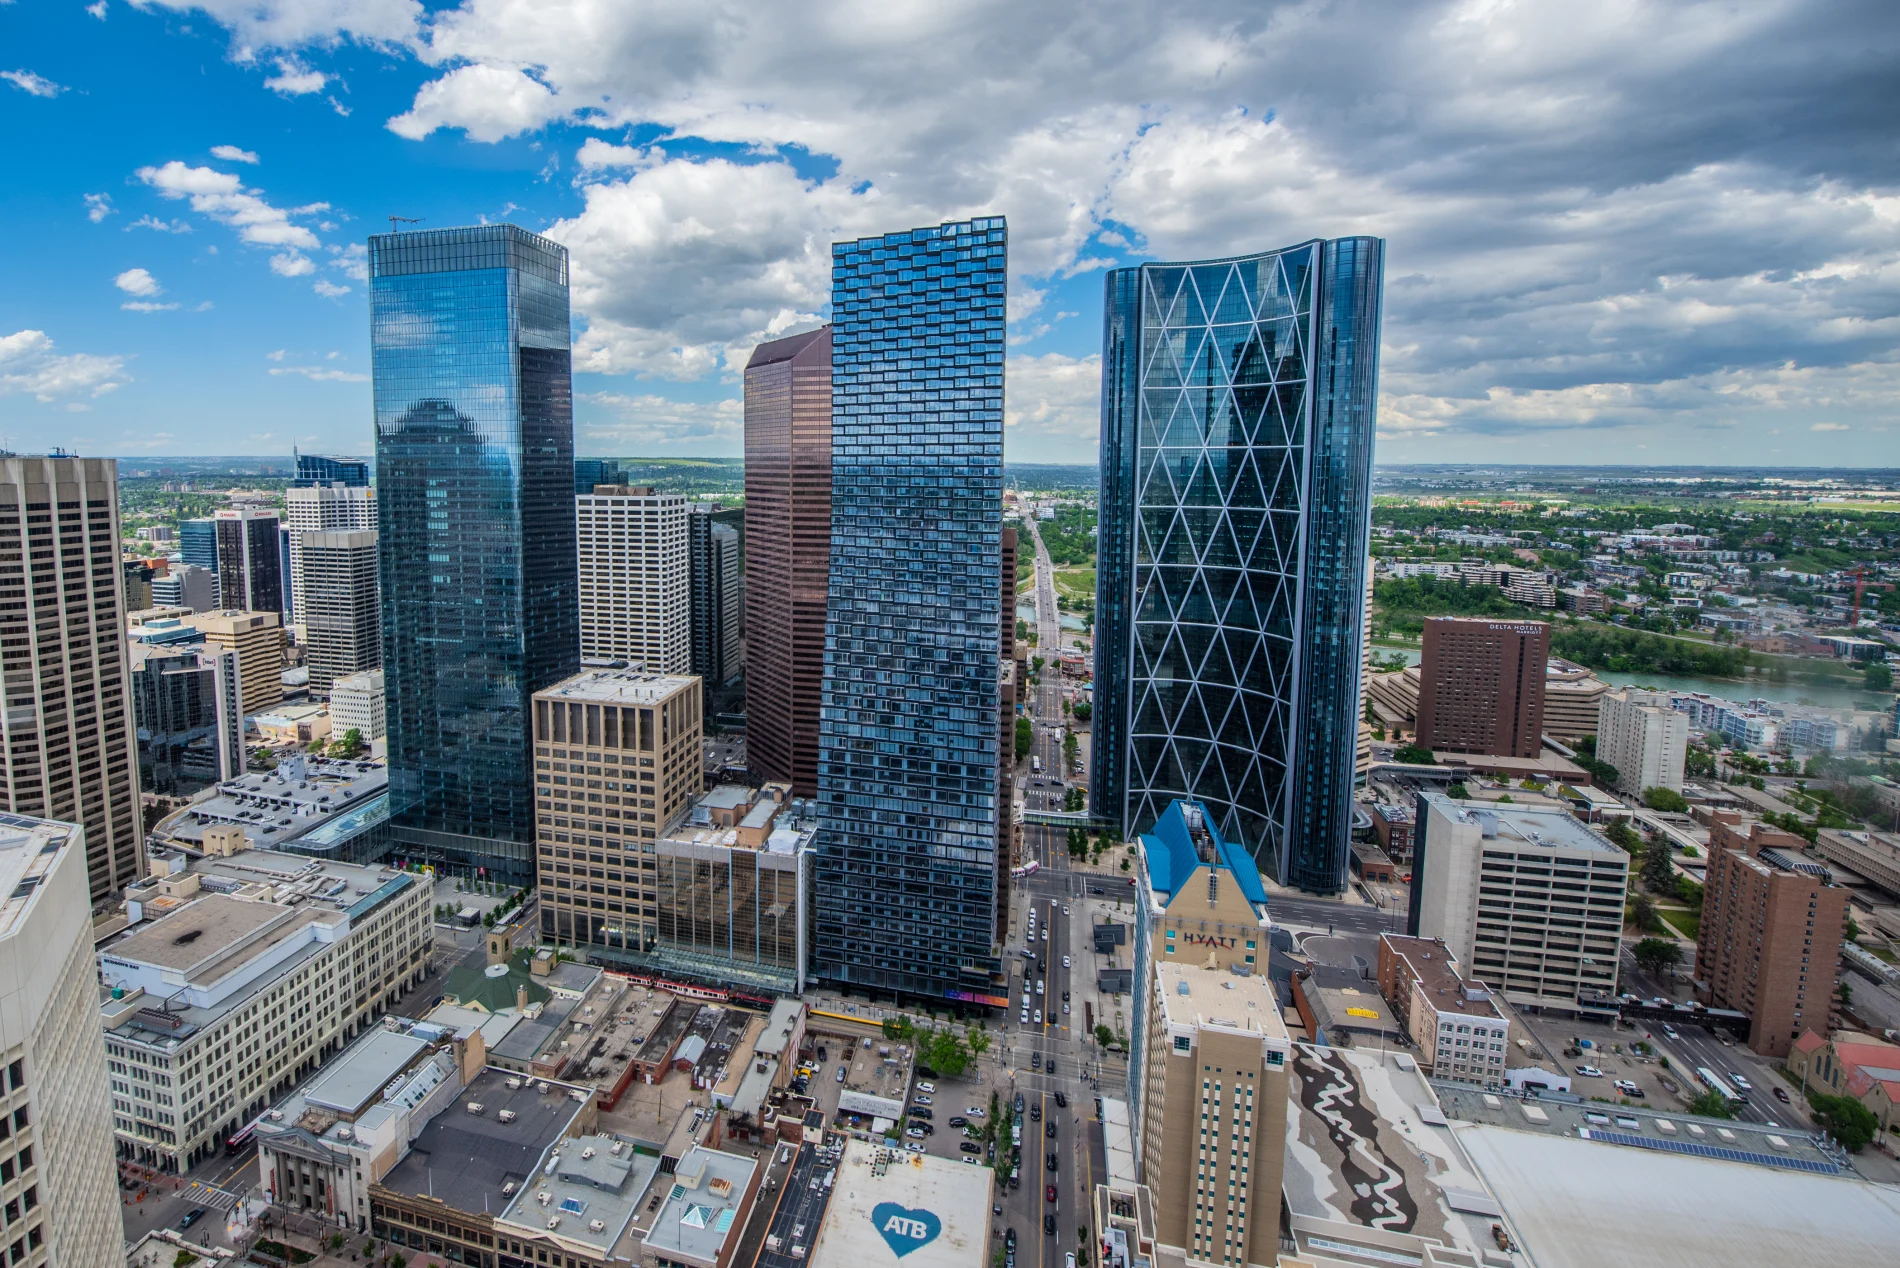 An aerial shot of buildings in Calgary, featuring the new TELUS Sky